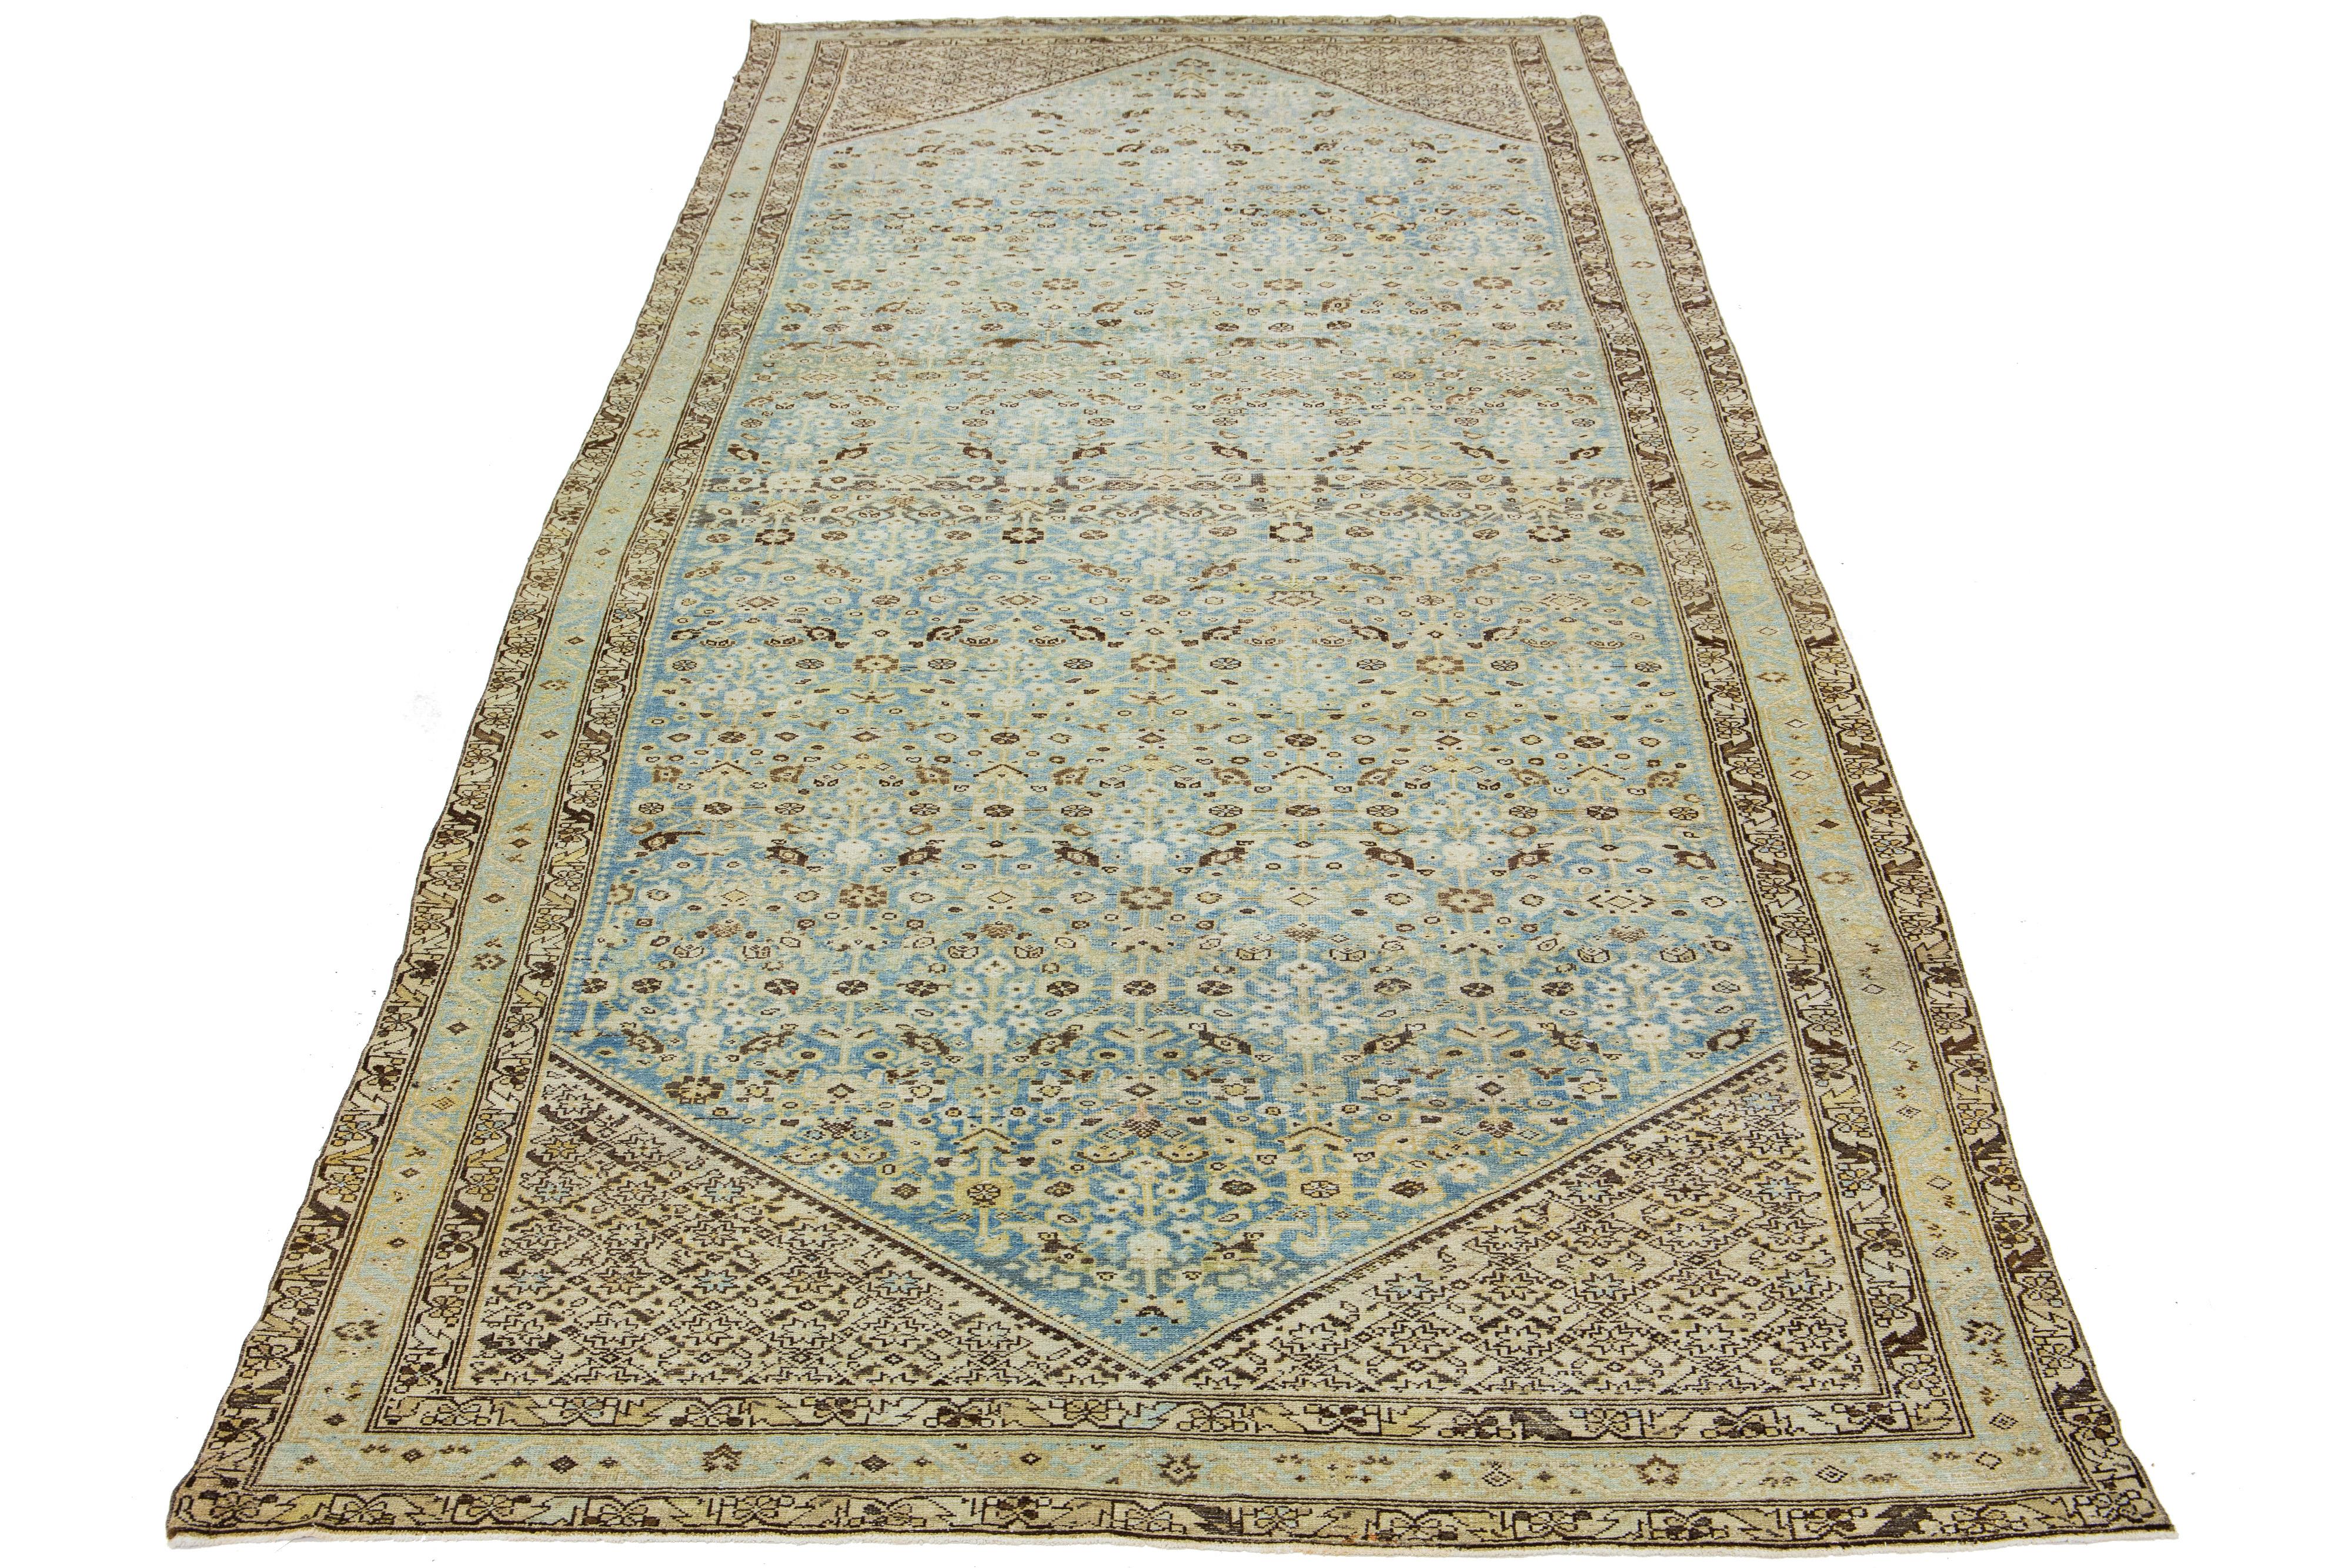 This exceptional, antique Persian Malayer rug is handcrafted from meticulously woven wool. The display features a calm light blue at its base, embellished with brown highlights in an impressively intricate all-over classical pattern.

This rug